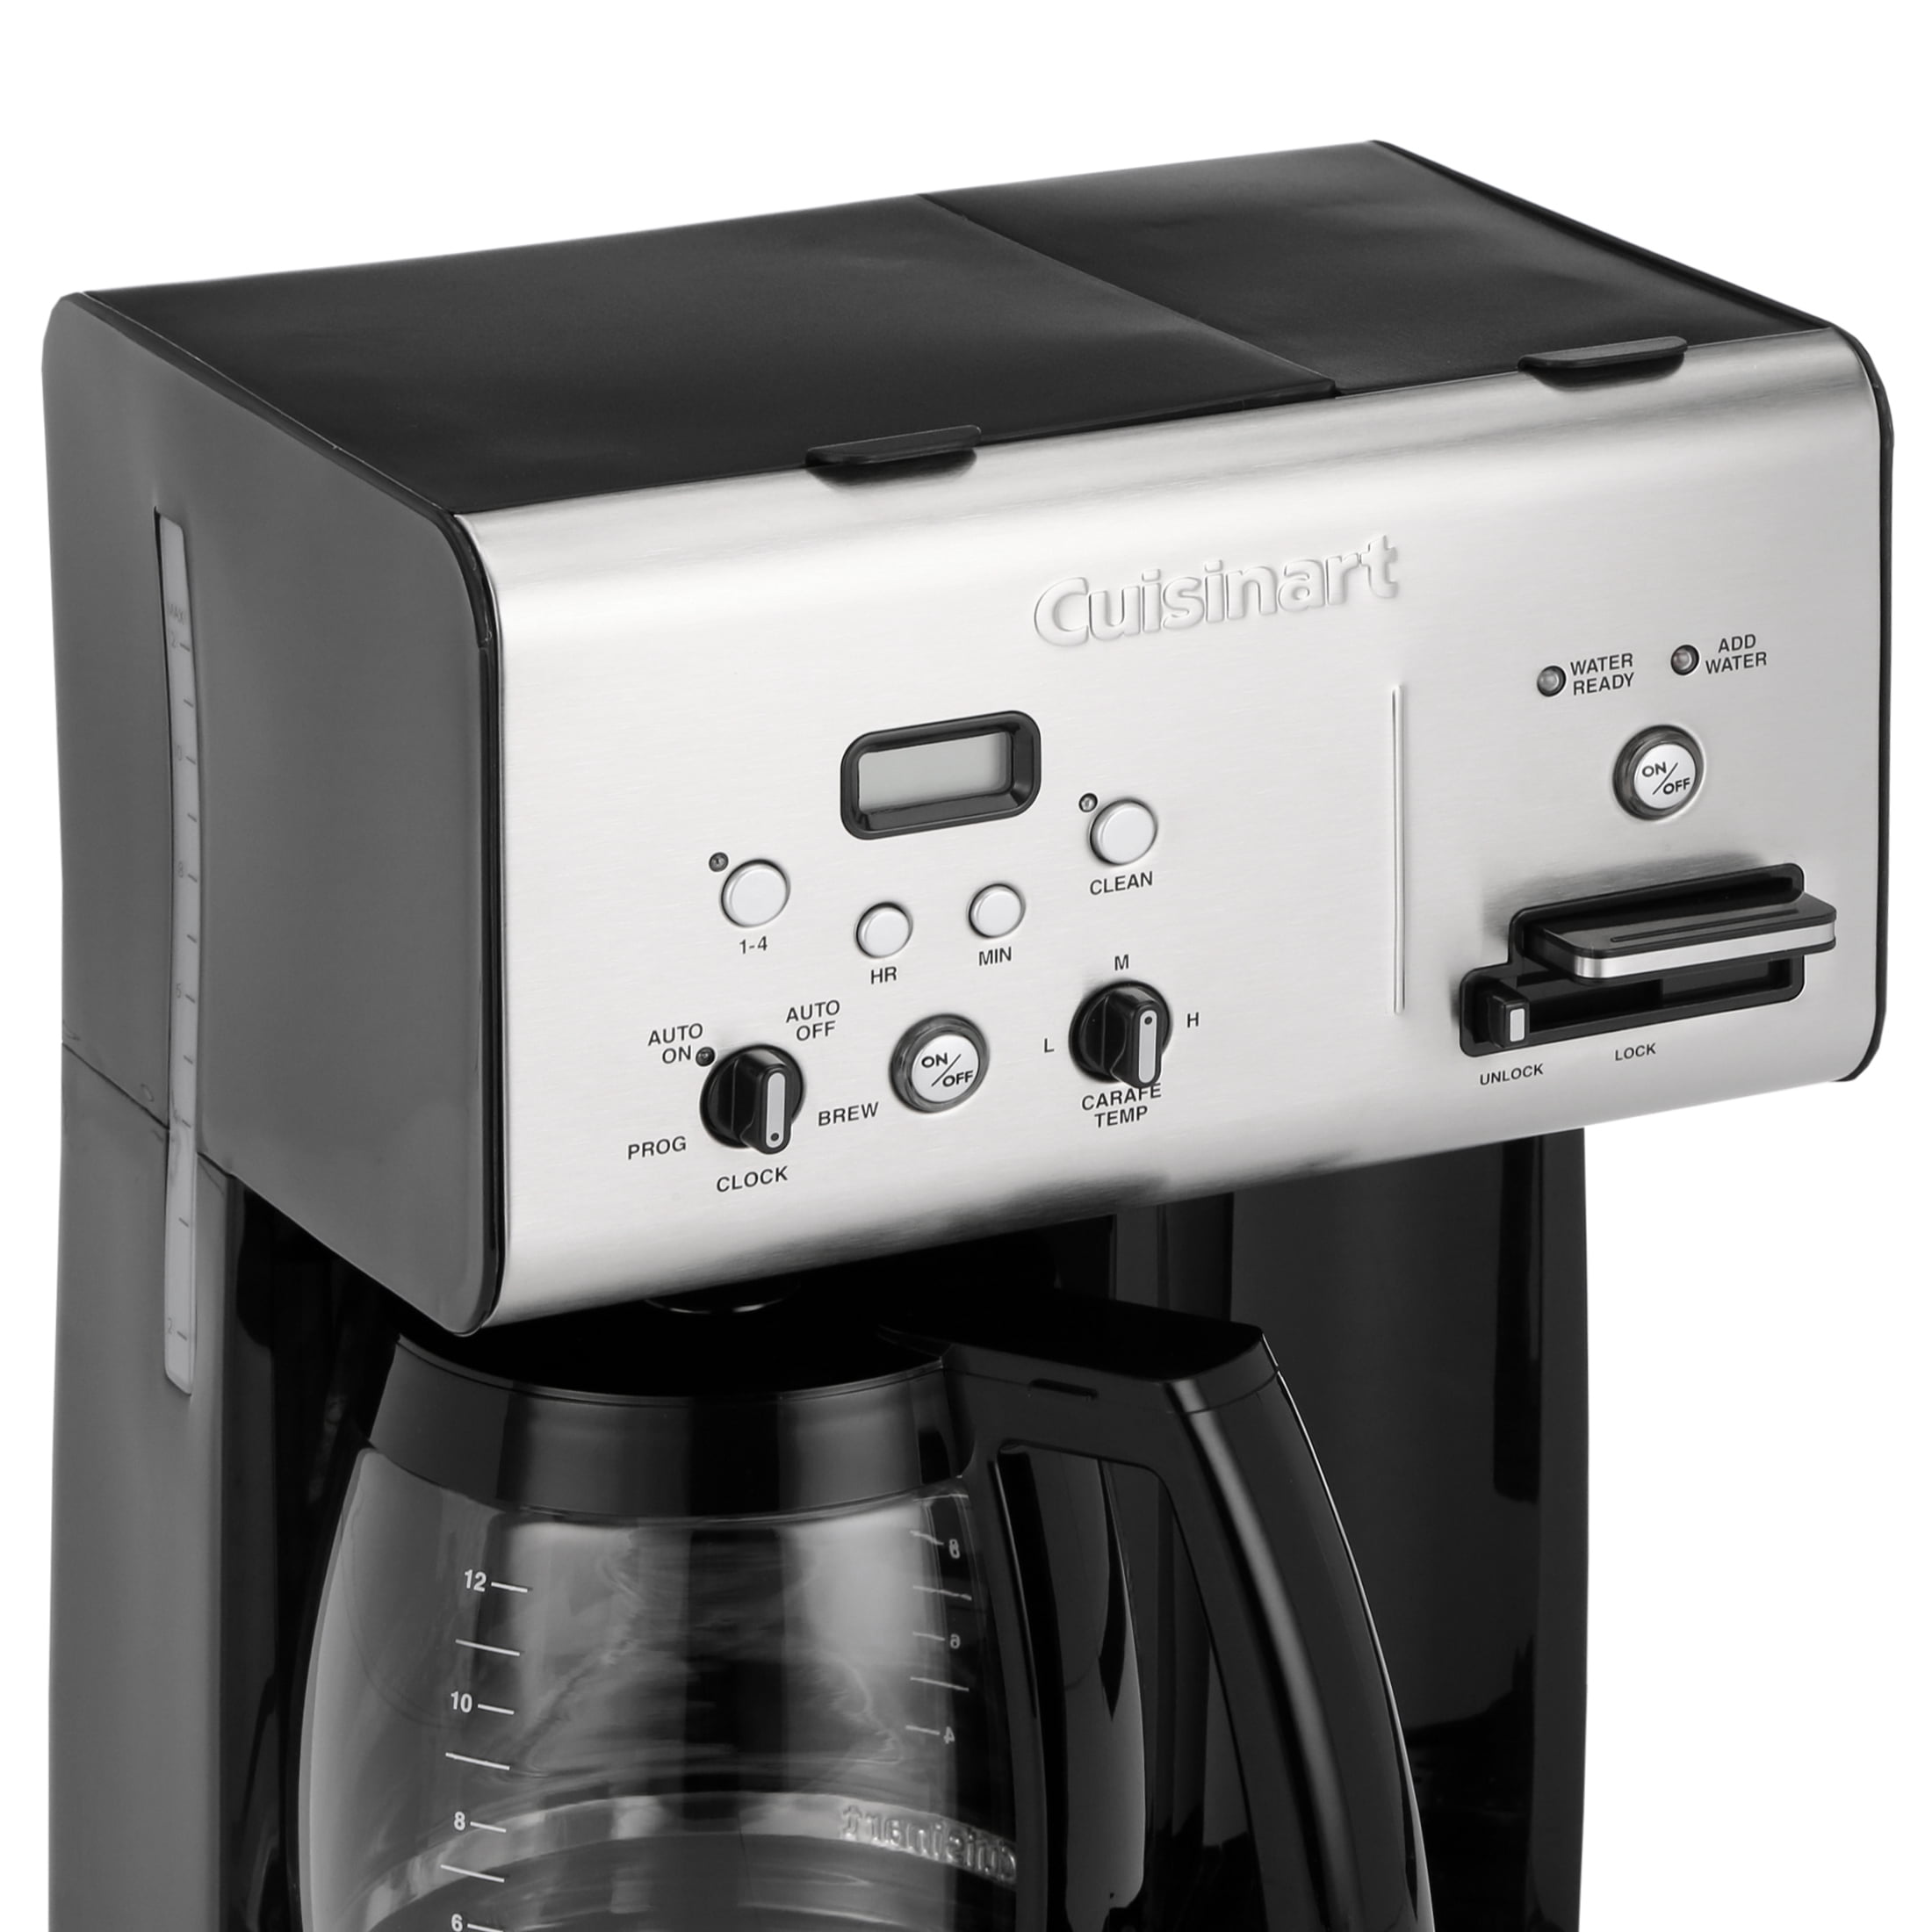  Cuisinart Plus 12-Cup Hot Water Coffee Maker, Black/Stainless